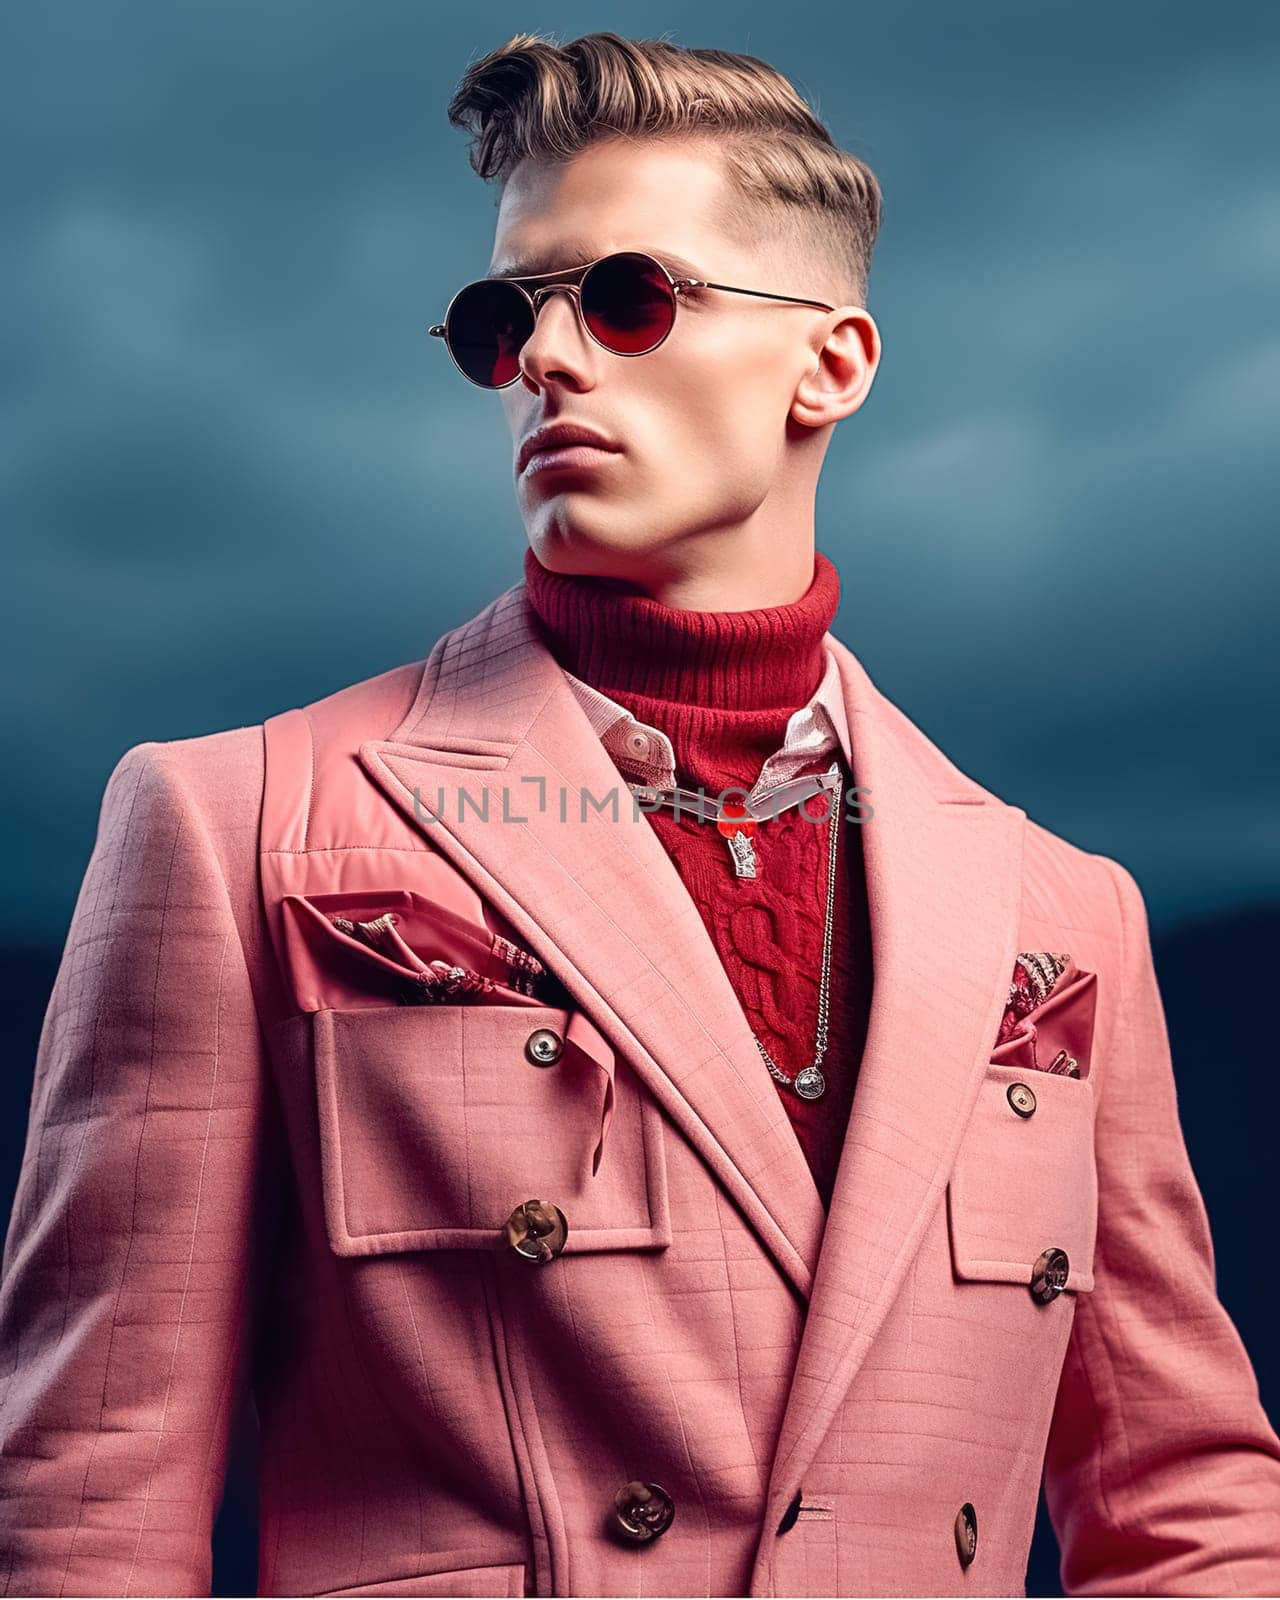 Stylish fashionable blond man in glasses and a pink suit from famous brands. High quality photo